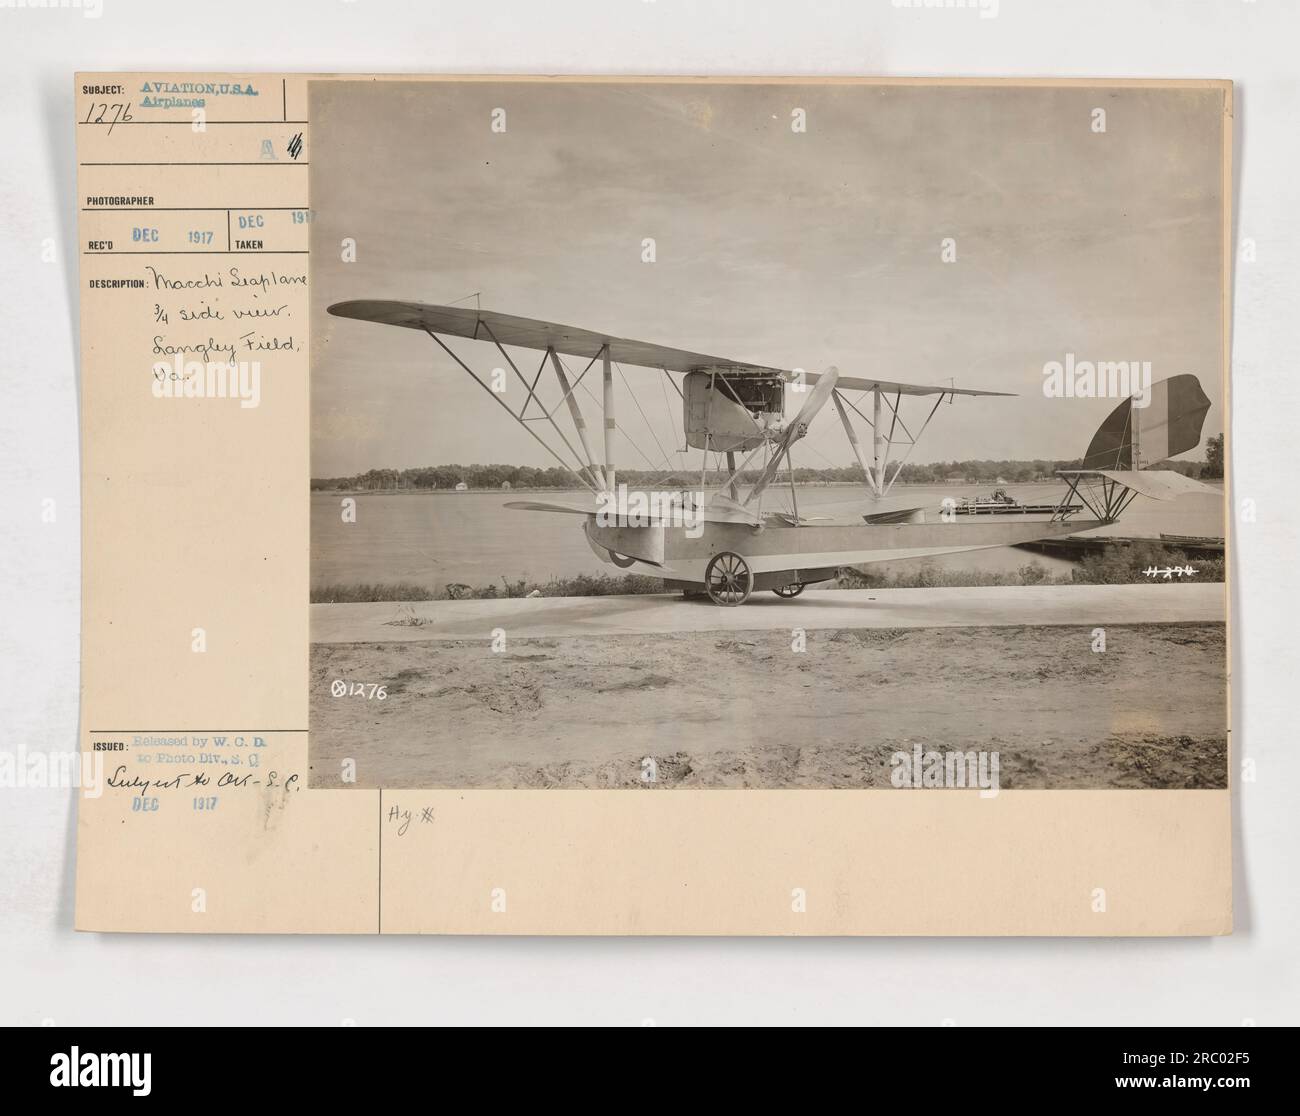 A Macchi seaplane is seen in a 3/4 side view at Langley Field, Virginia in 1917. The photograph was taken at Sangley Field. It was released by W.O.D. to the Photo Division Supply Officer on December 199, and issued for distribution in December 1917. Reference number: 111-SC-1276. Stock Photo